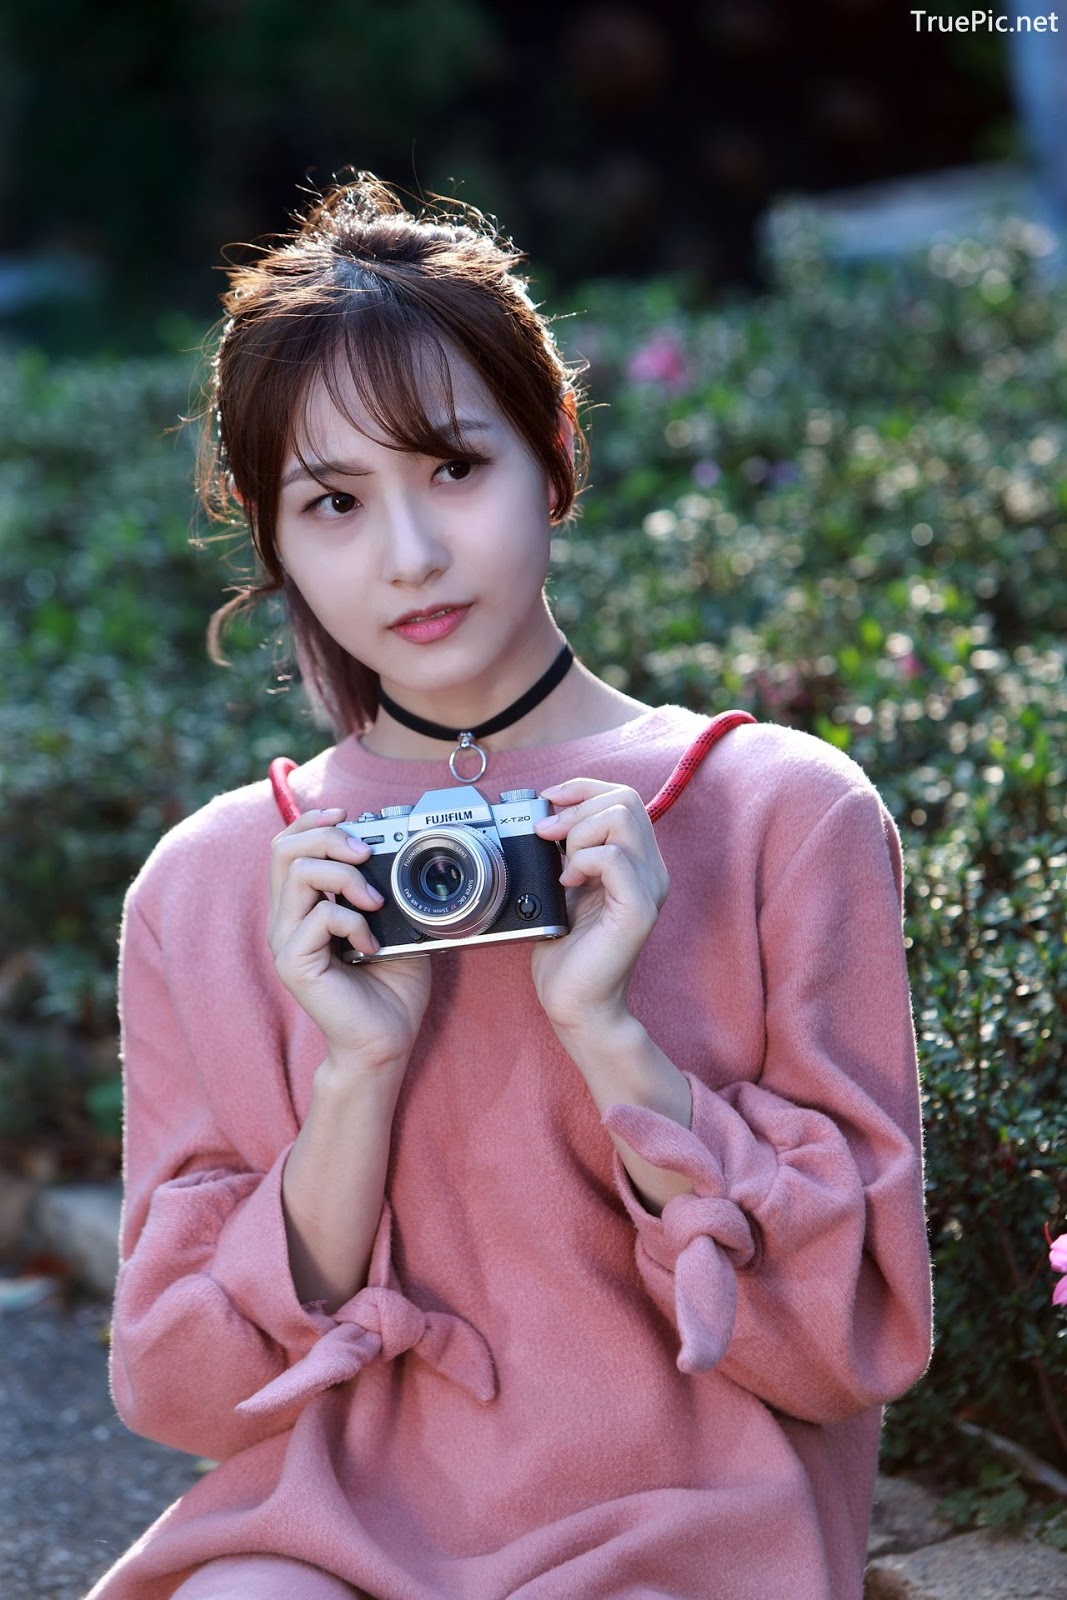 Image-Taiwanese-Model-郭思敏-Pure-And-Gorgeous-Girl-In-Pink-Sweater-Dress-TruePic.net- Picture-20